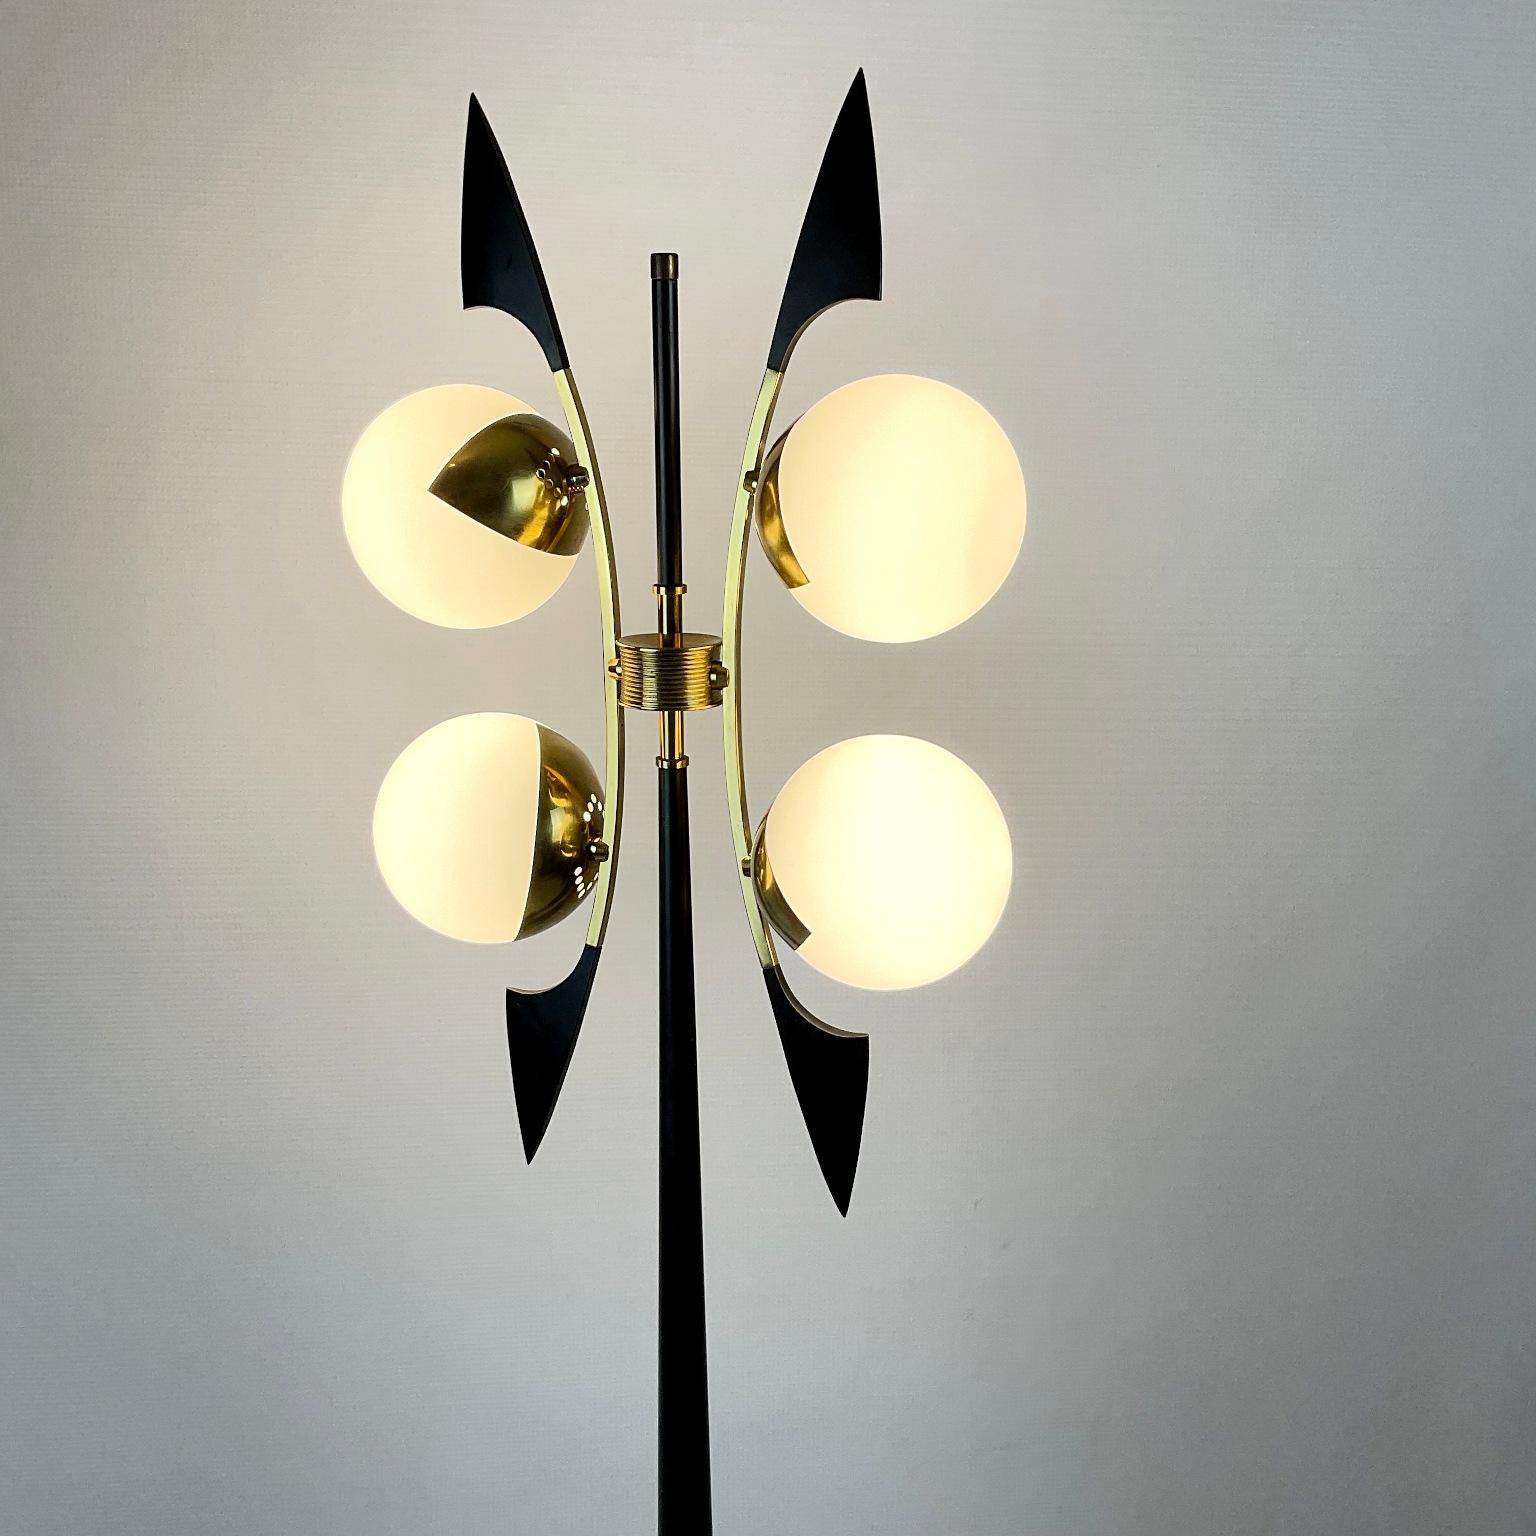 French 1950s Floor Lamp Edited by Maison Arlus with Four Globes and Brass Saber Finish For Sale